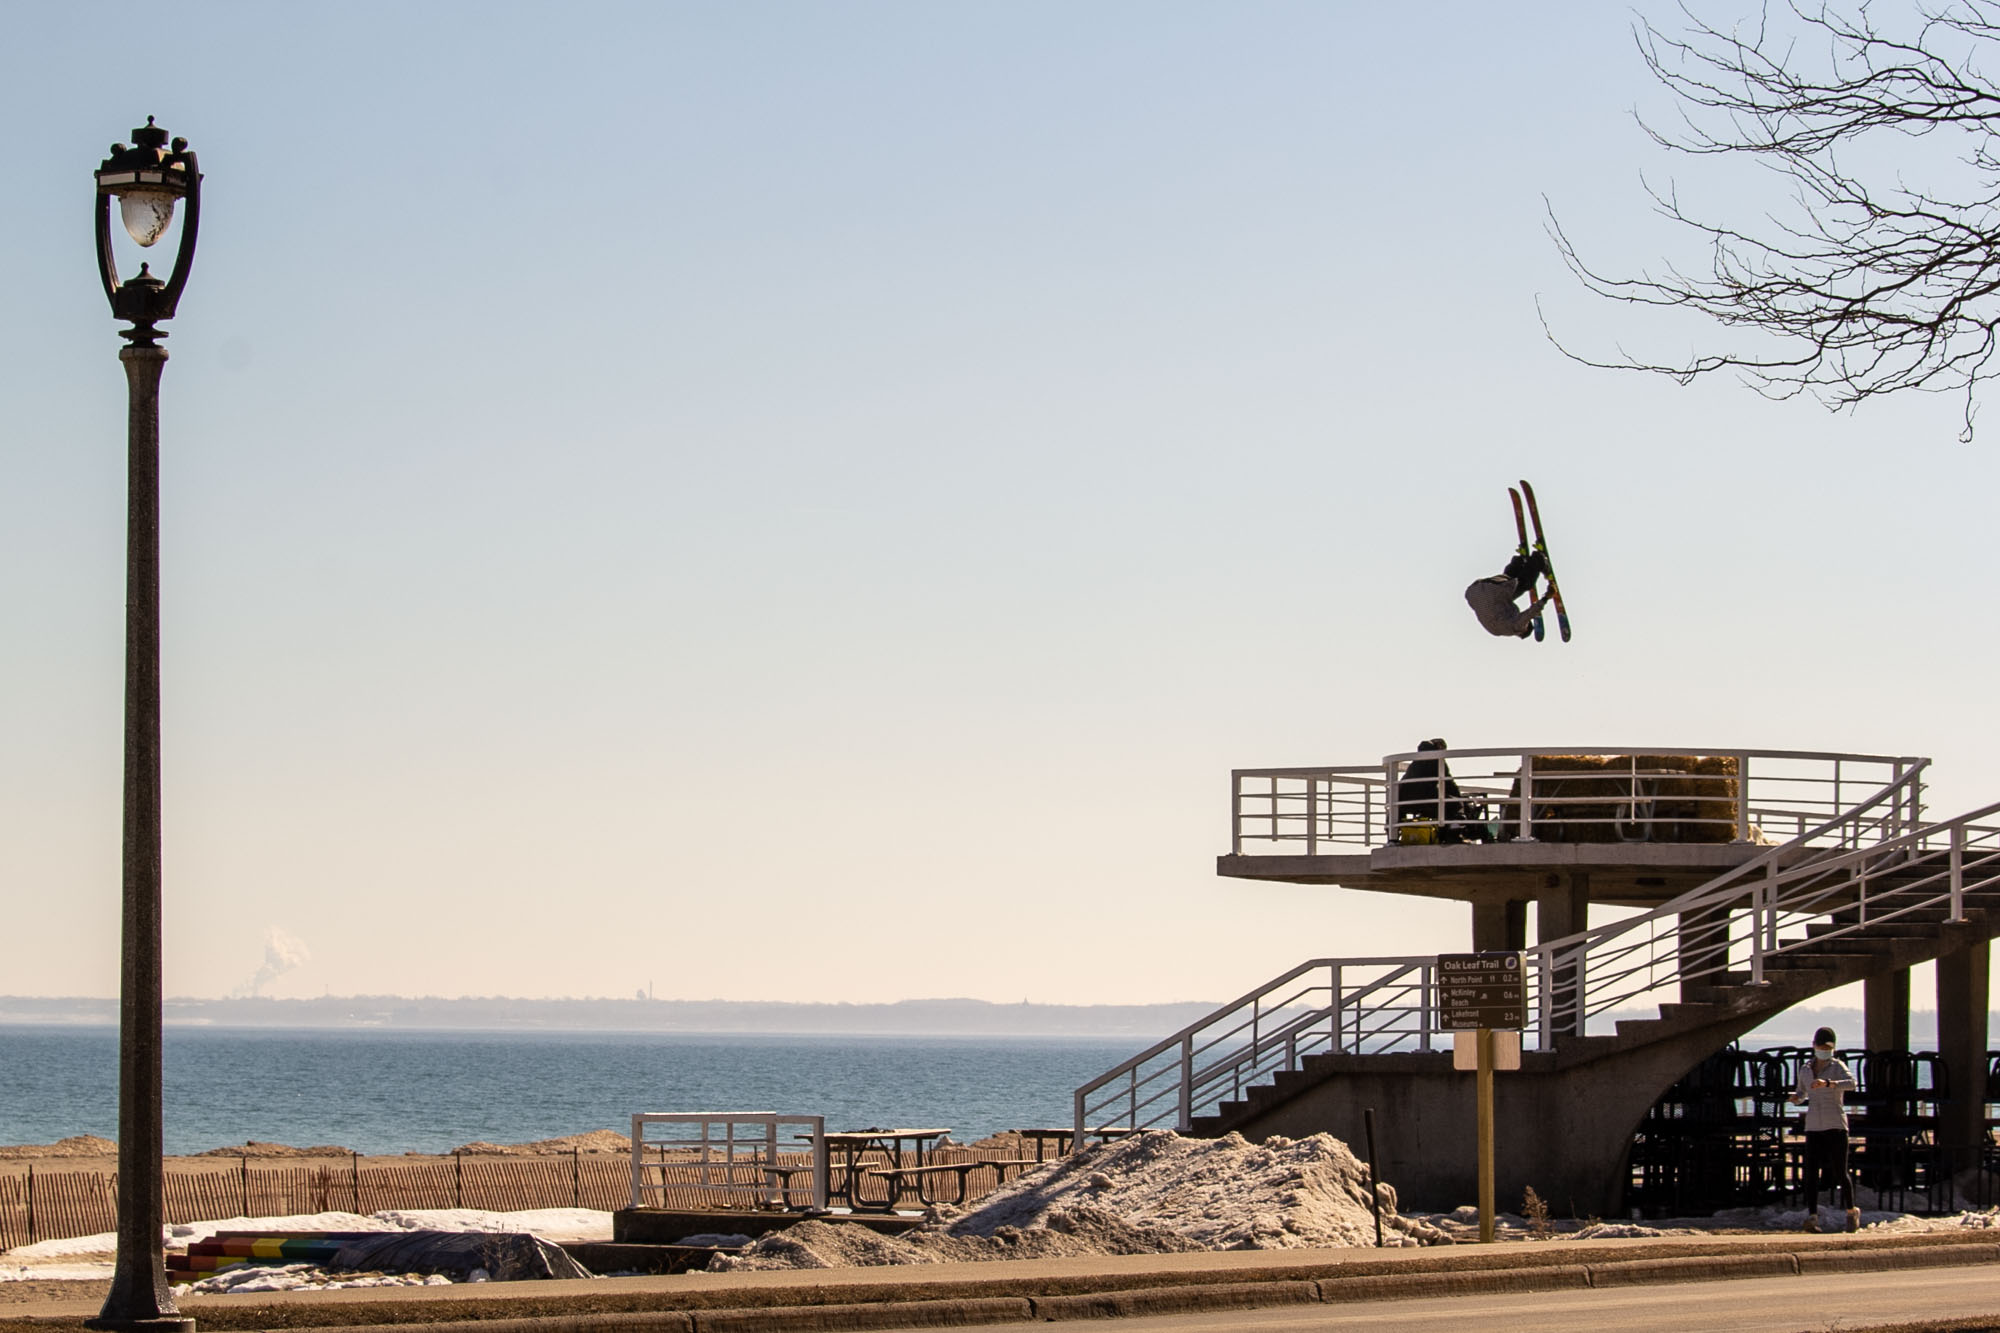 Calvin Barrett punches a front flip on a sketchy step-down on the shore of Lake Michigan.